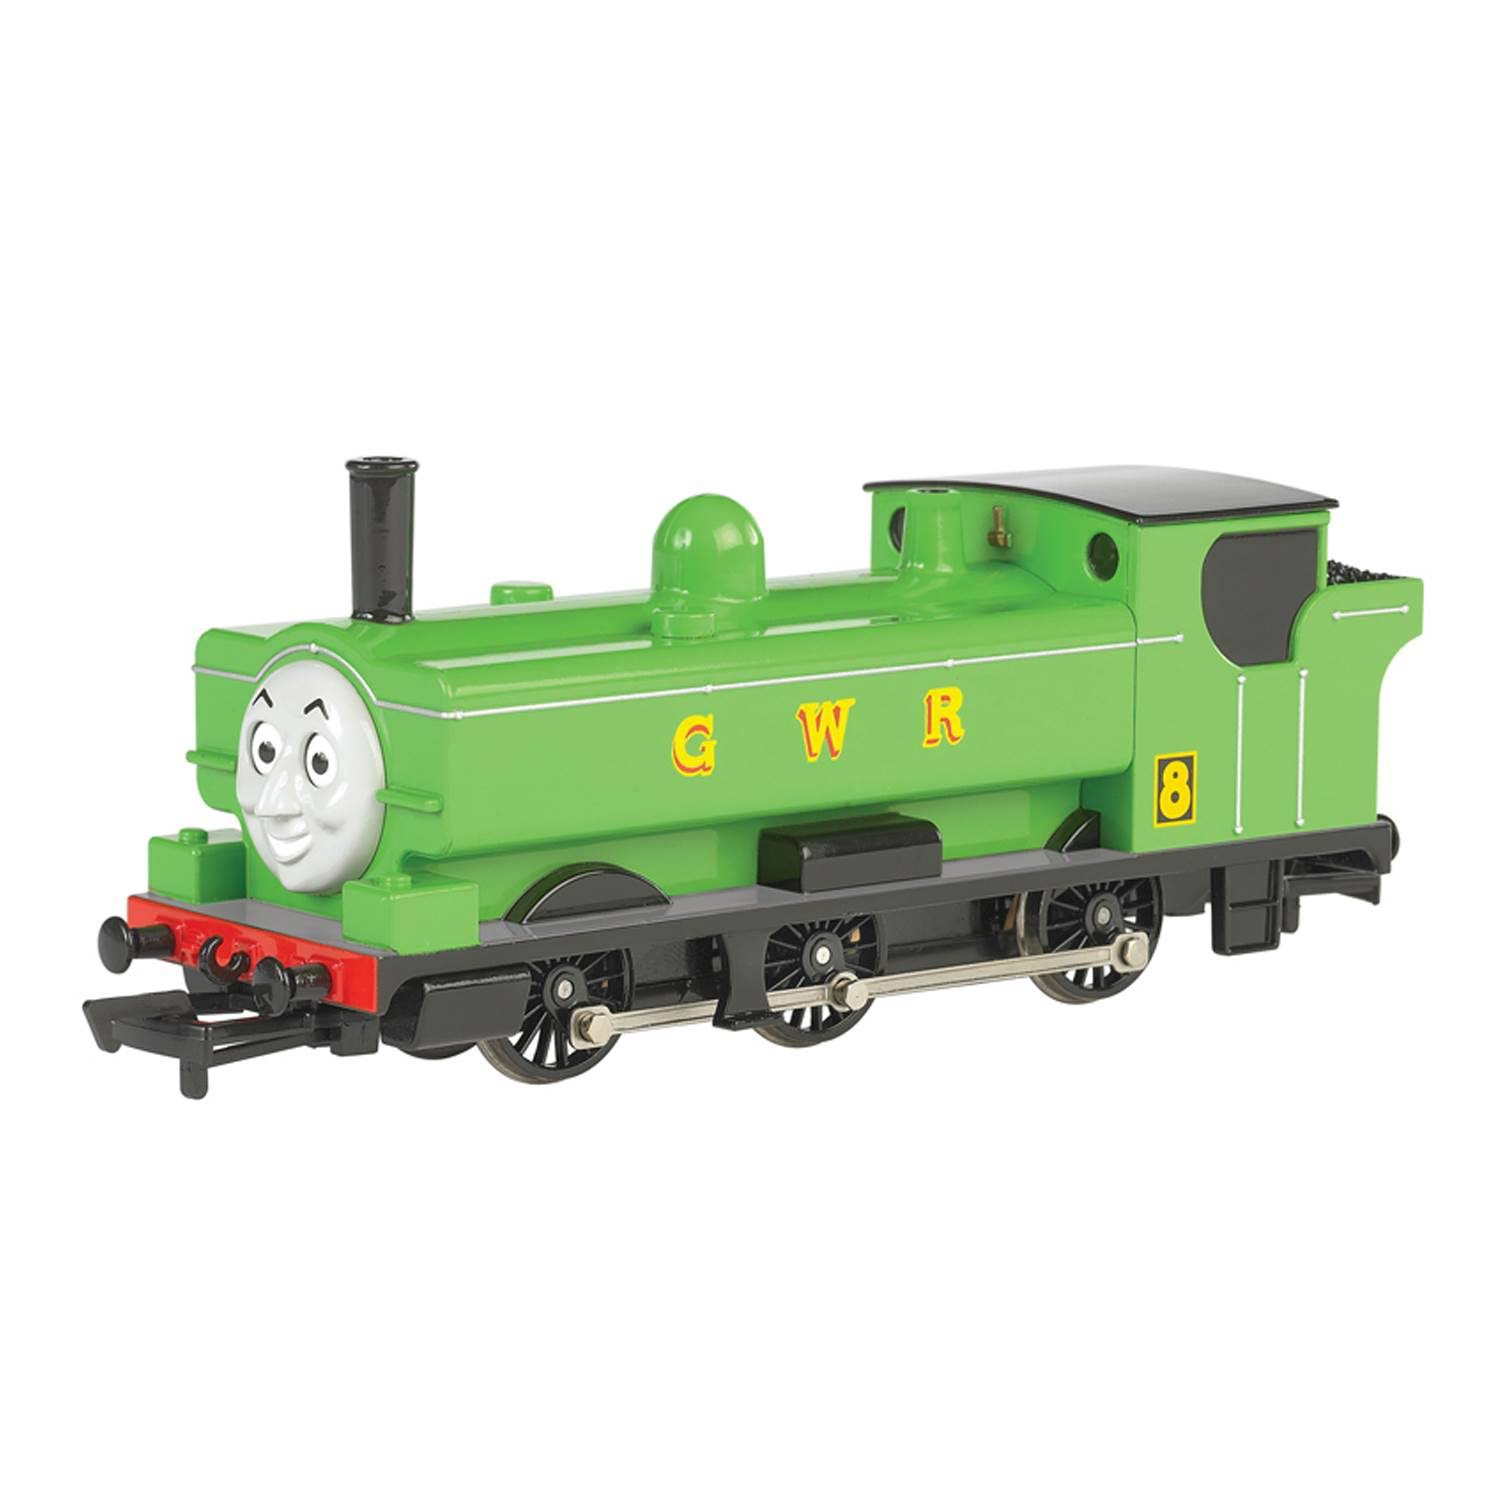 Bachmann Trains Thomas and Friends Duck Locomotive With Moving Eyes- HO Scale Train